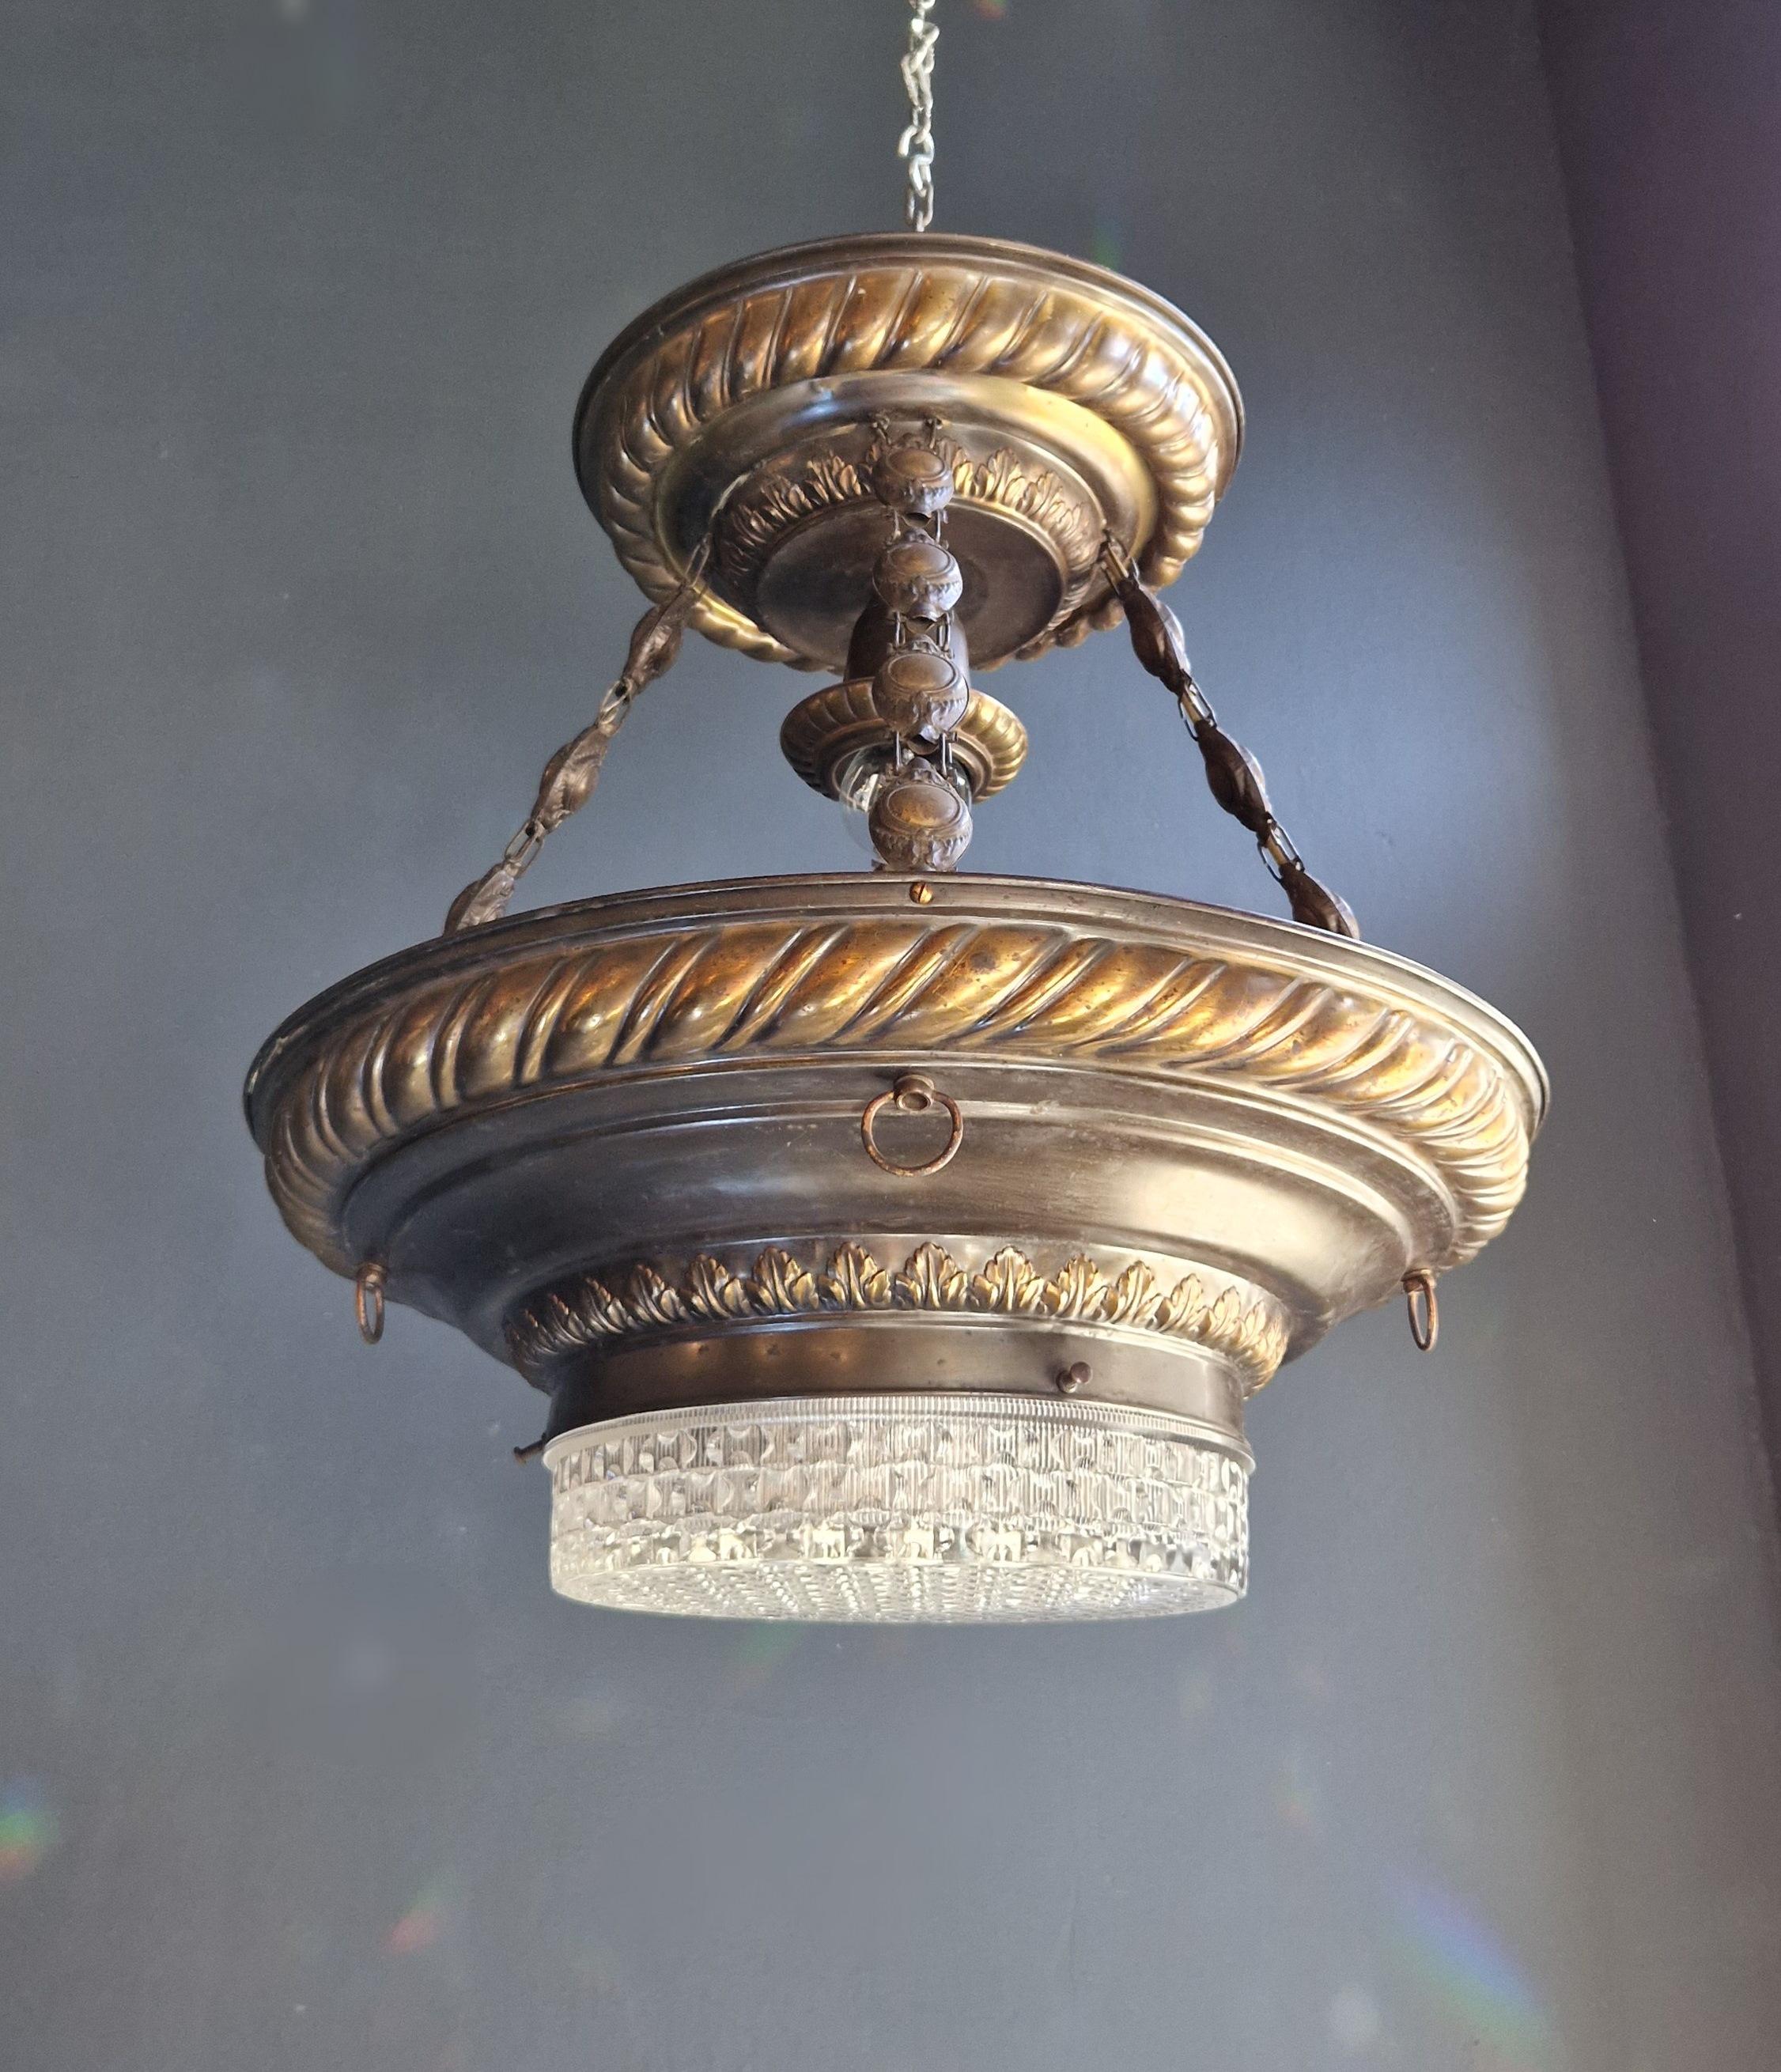 Introducing our exquisite antique chandelier, lovingly restored in Berlin with meticulous attention to detail. This elegant piece has been re-wired to work seamlessly with US electrical systems and is now ready to be hung, radiating its timeless